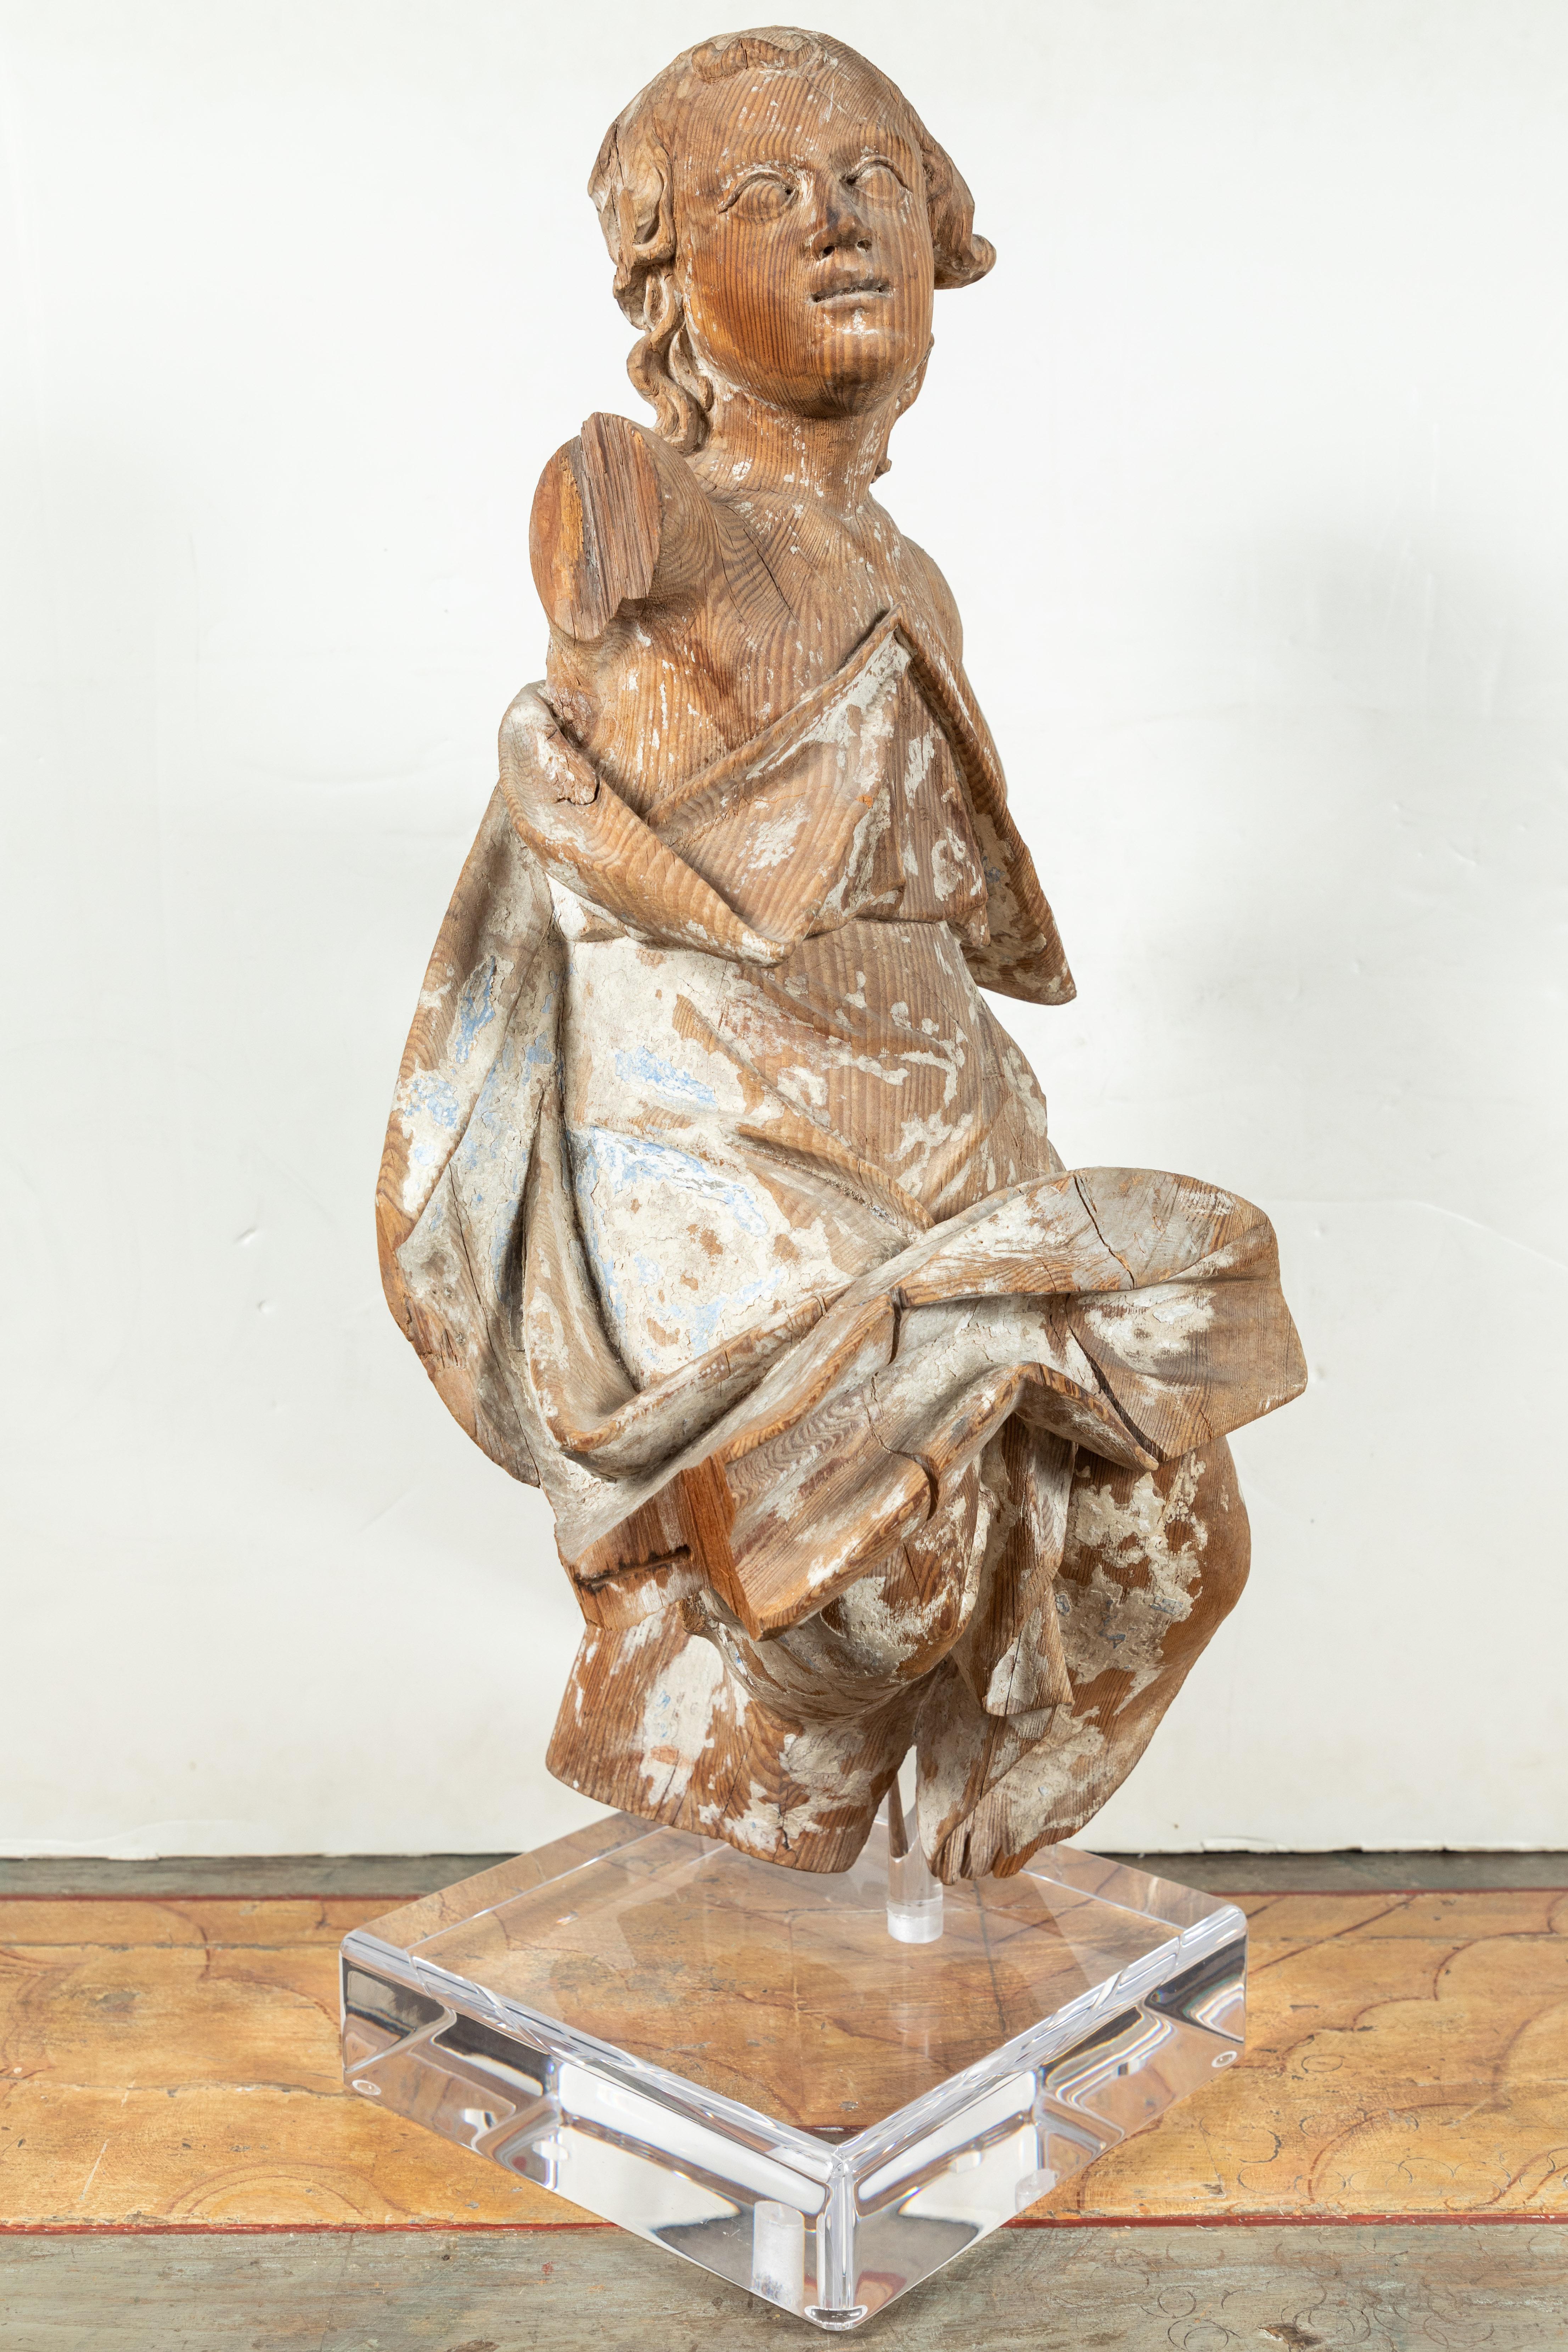 Hand-Carved 18th Century, Figural Sculpture Fragment